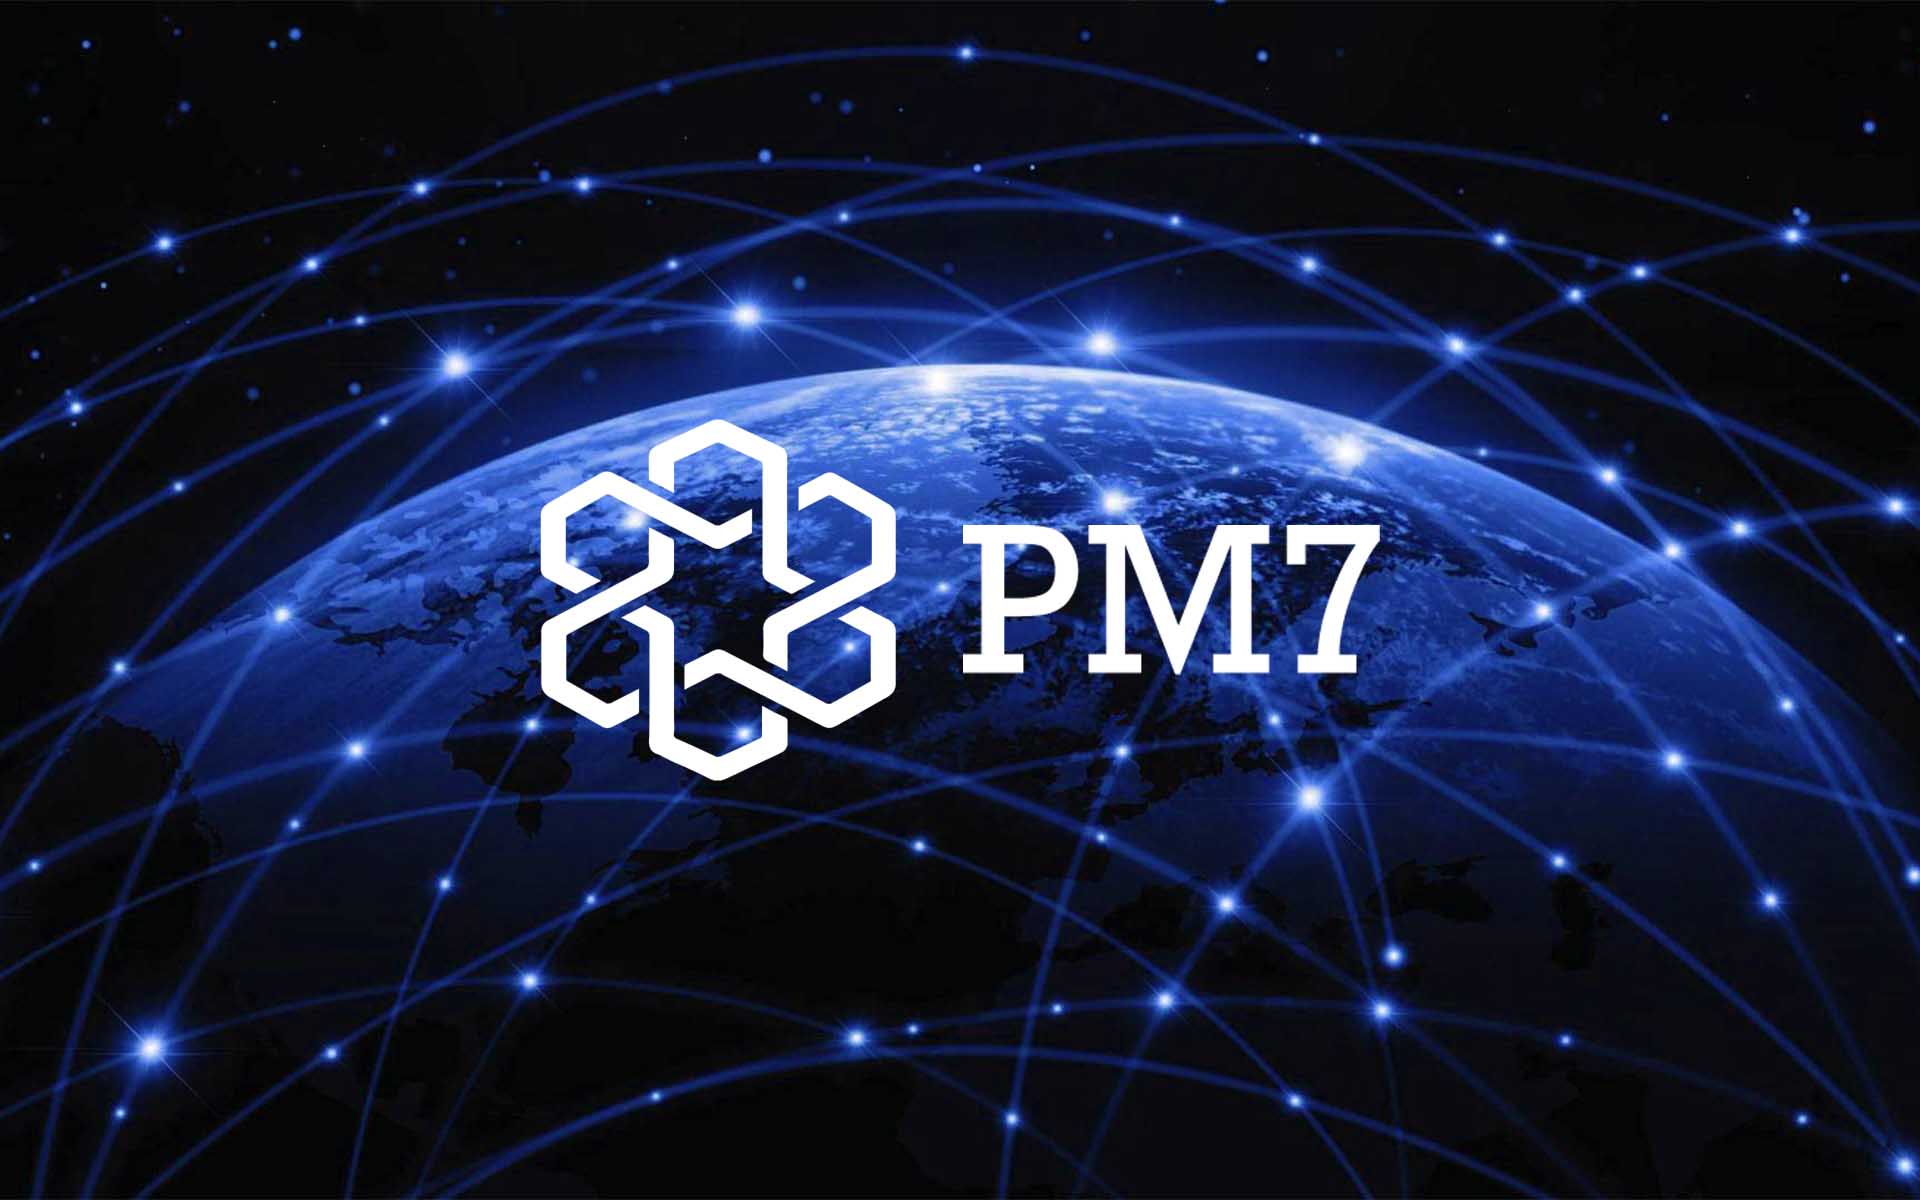 First-of-Its-Kind Affiliate Marketing Platform PM7 Leverages Blockchain Technology to Disrupt the World of Advertising